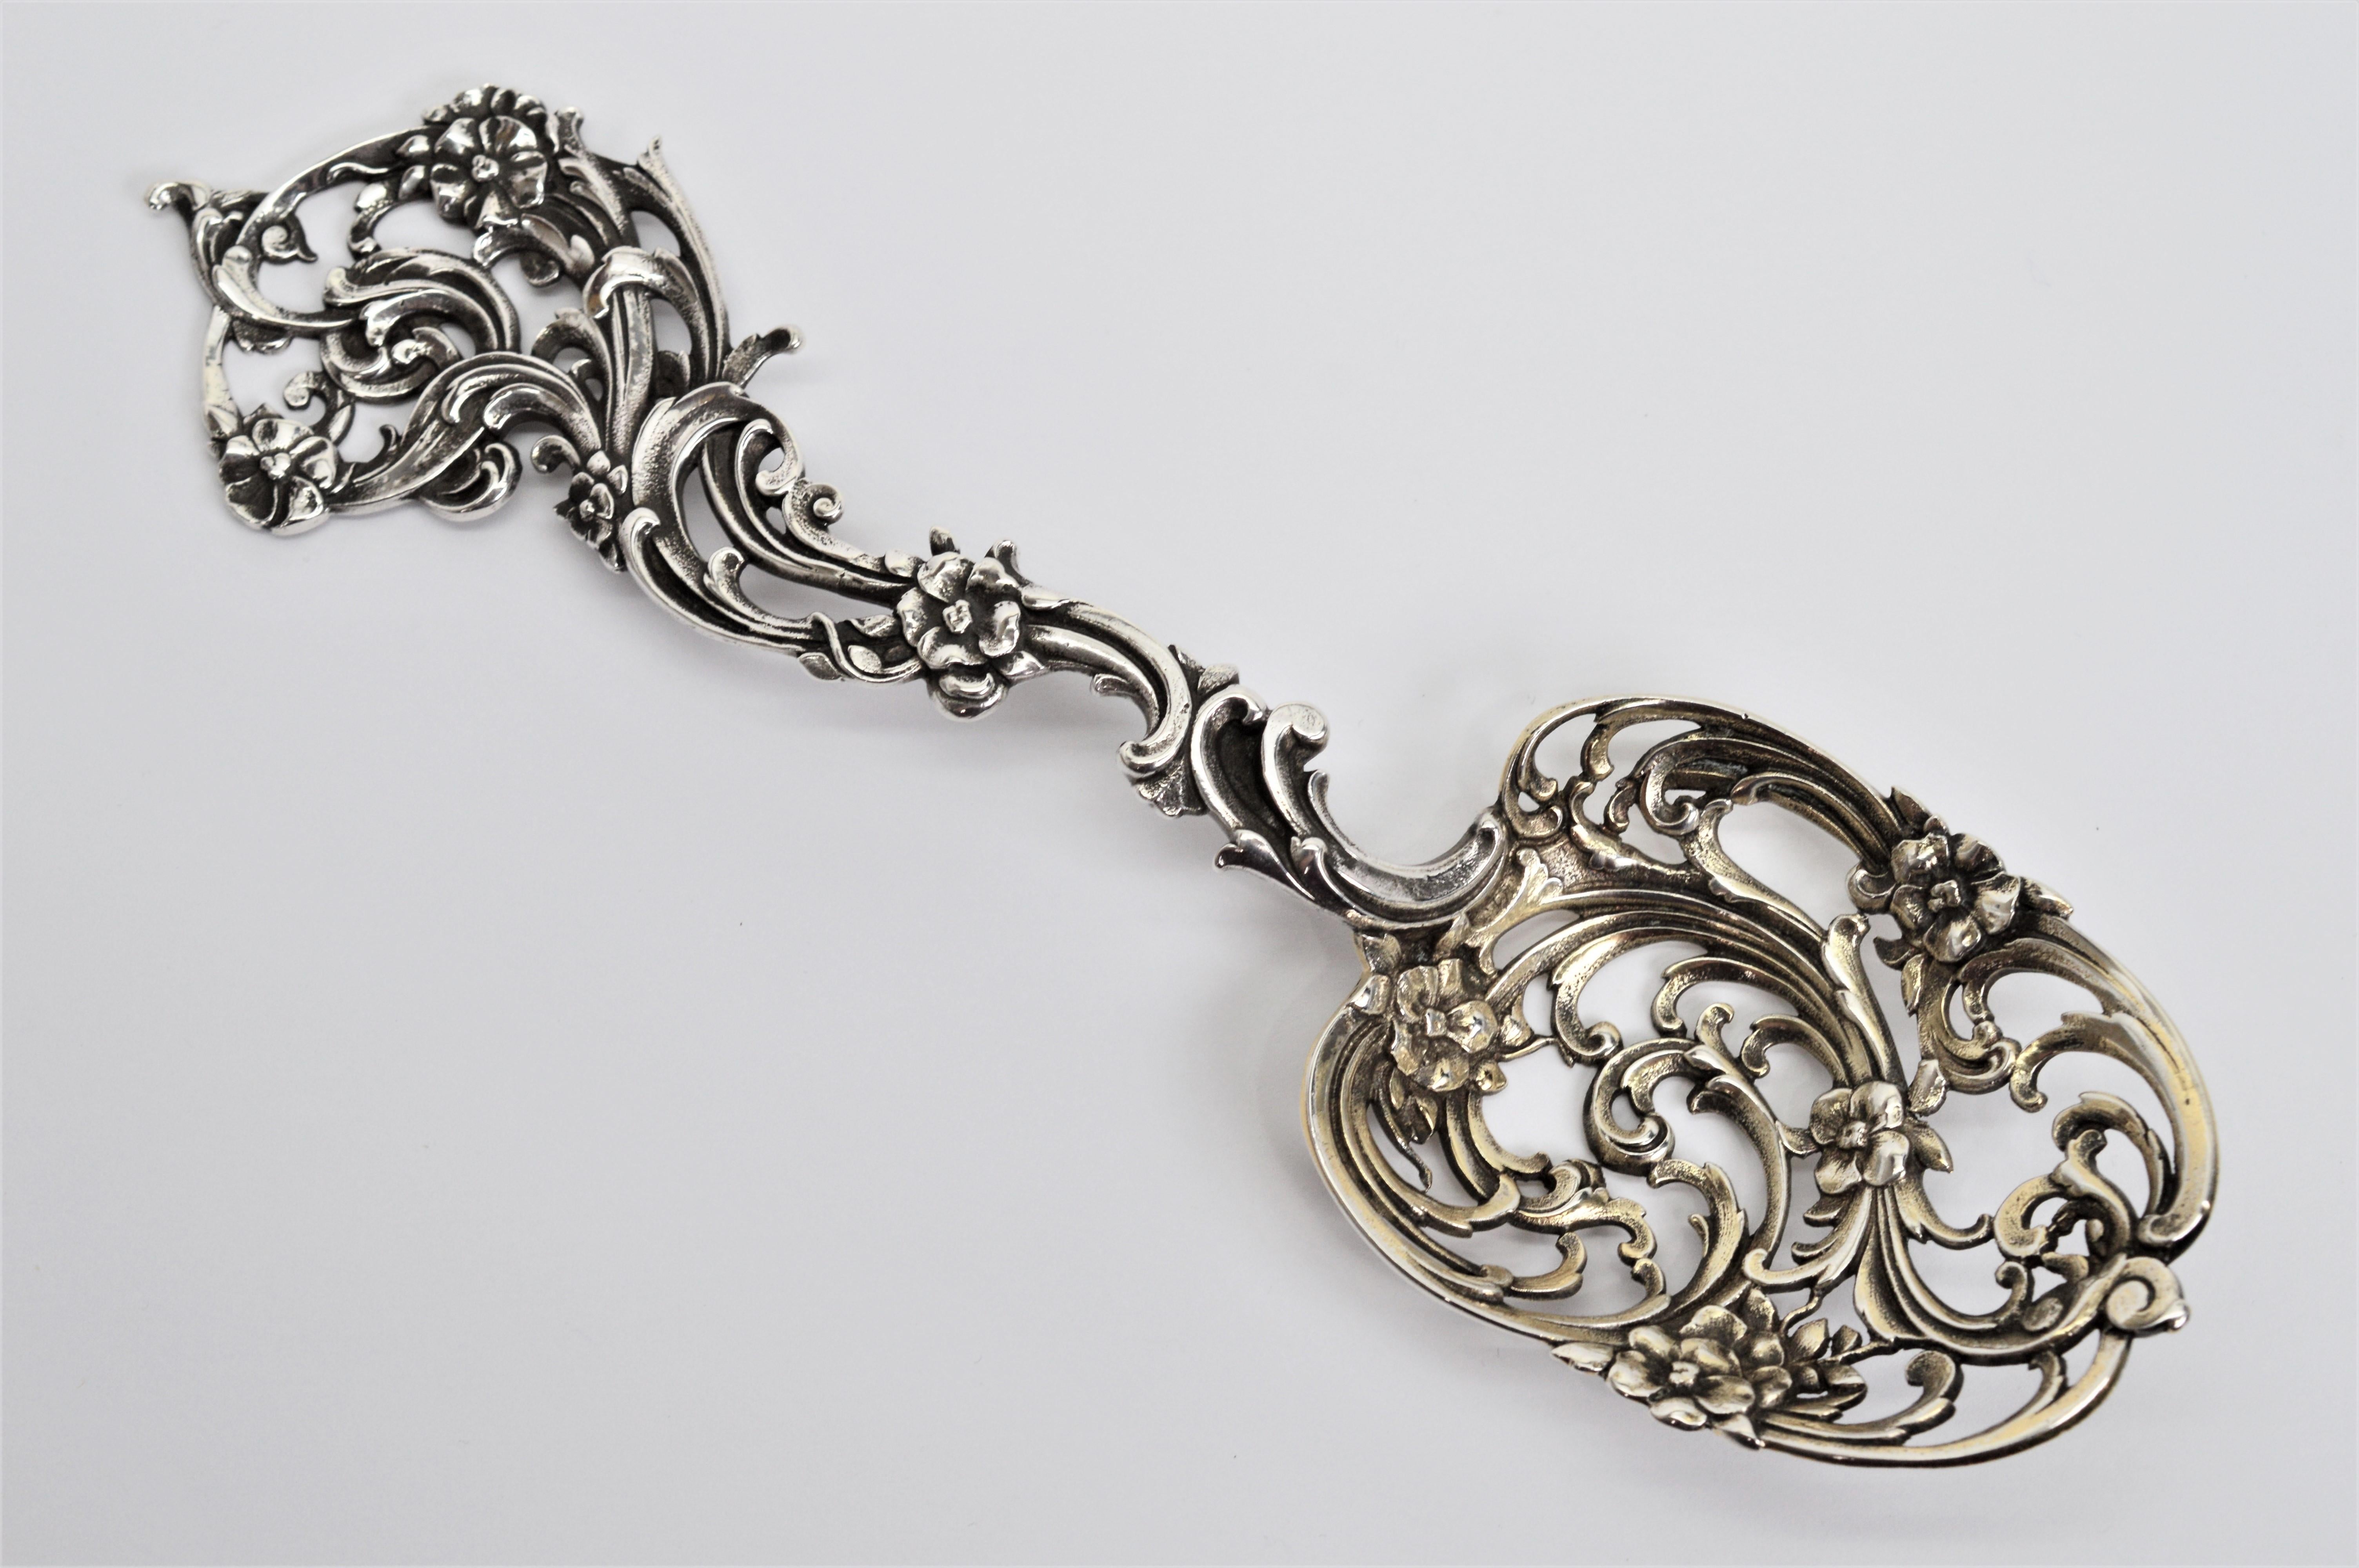 Beautifully hand pierced and chased with an intricate floral pattern, this Tiffany & Co. sterling silver bon bon spoon is a sweet accent for your serving table. Perfect for dessert, fruit or nuts, this serving spoon measures 7-1/2 inches in length.